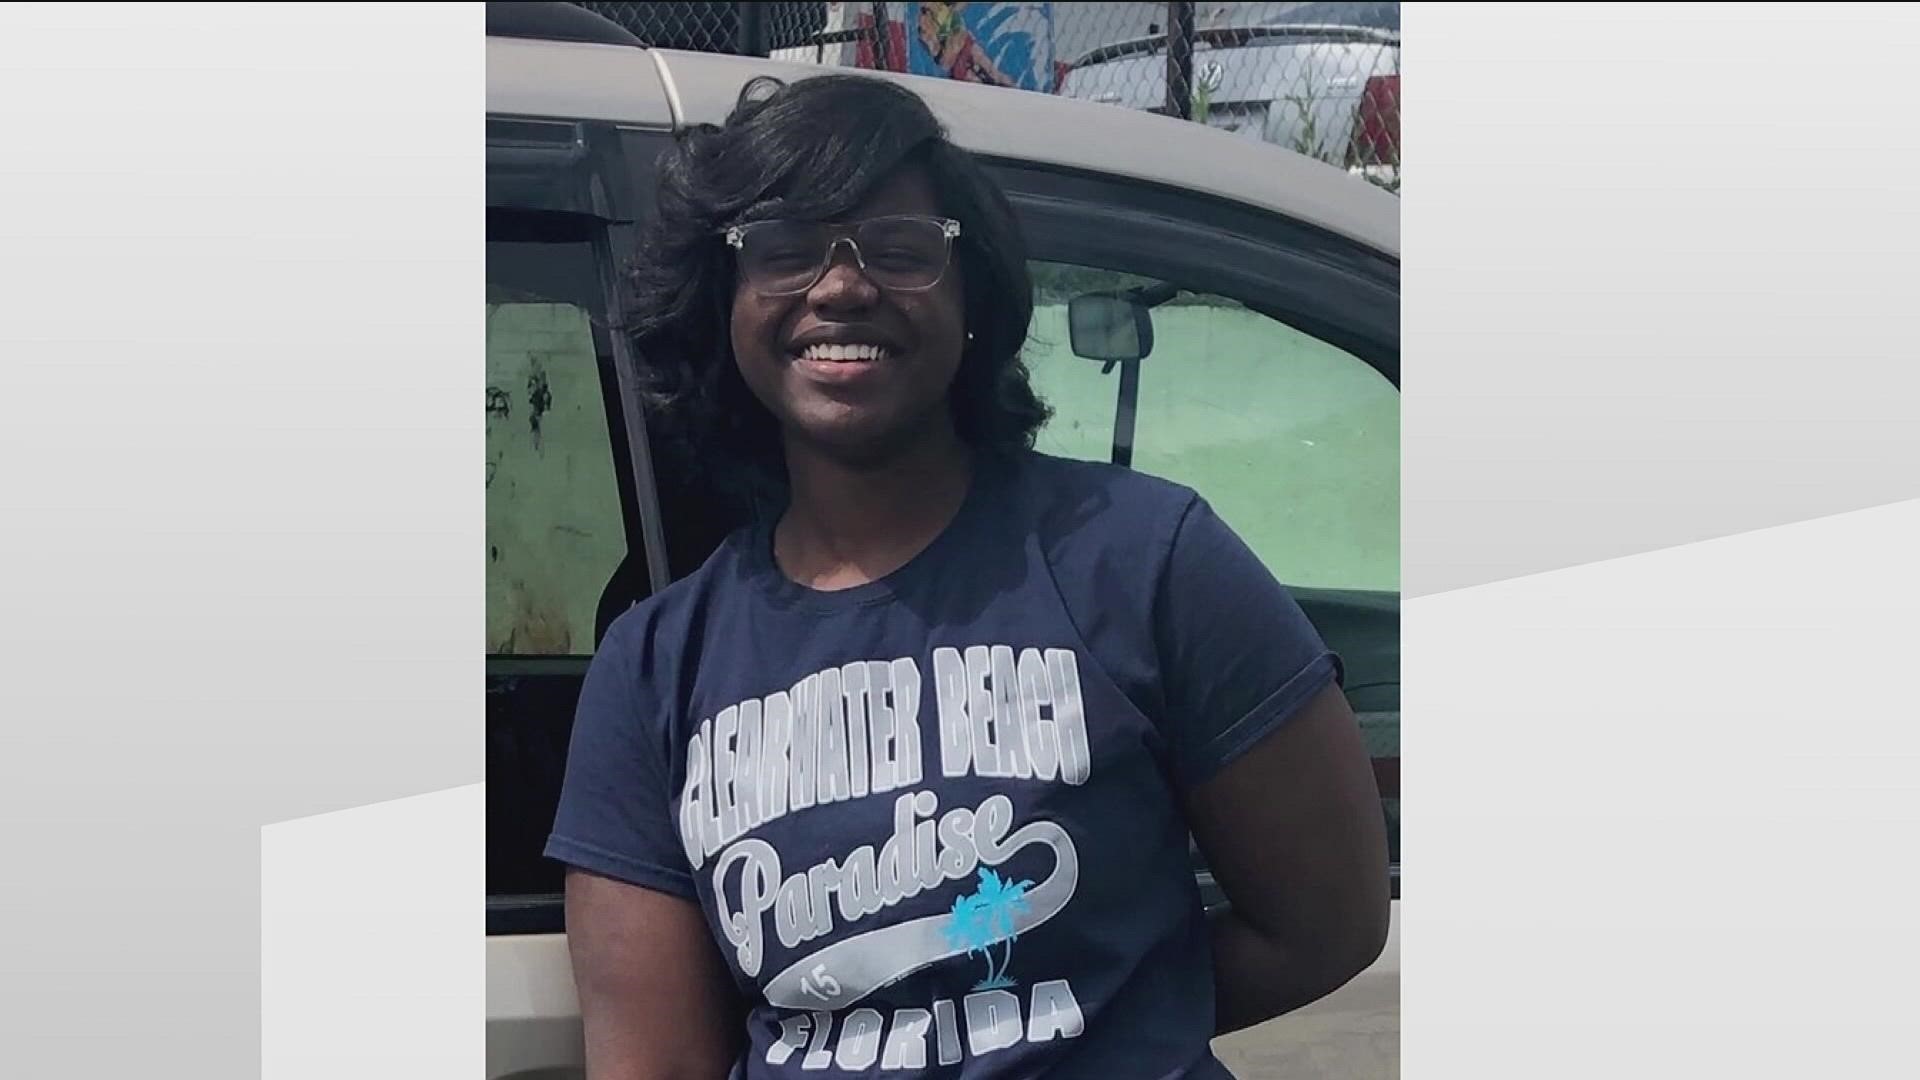 Imani Bell died following an outdoor high school basketball practice on a hot afternoon in August of 2019.